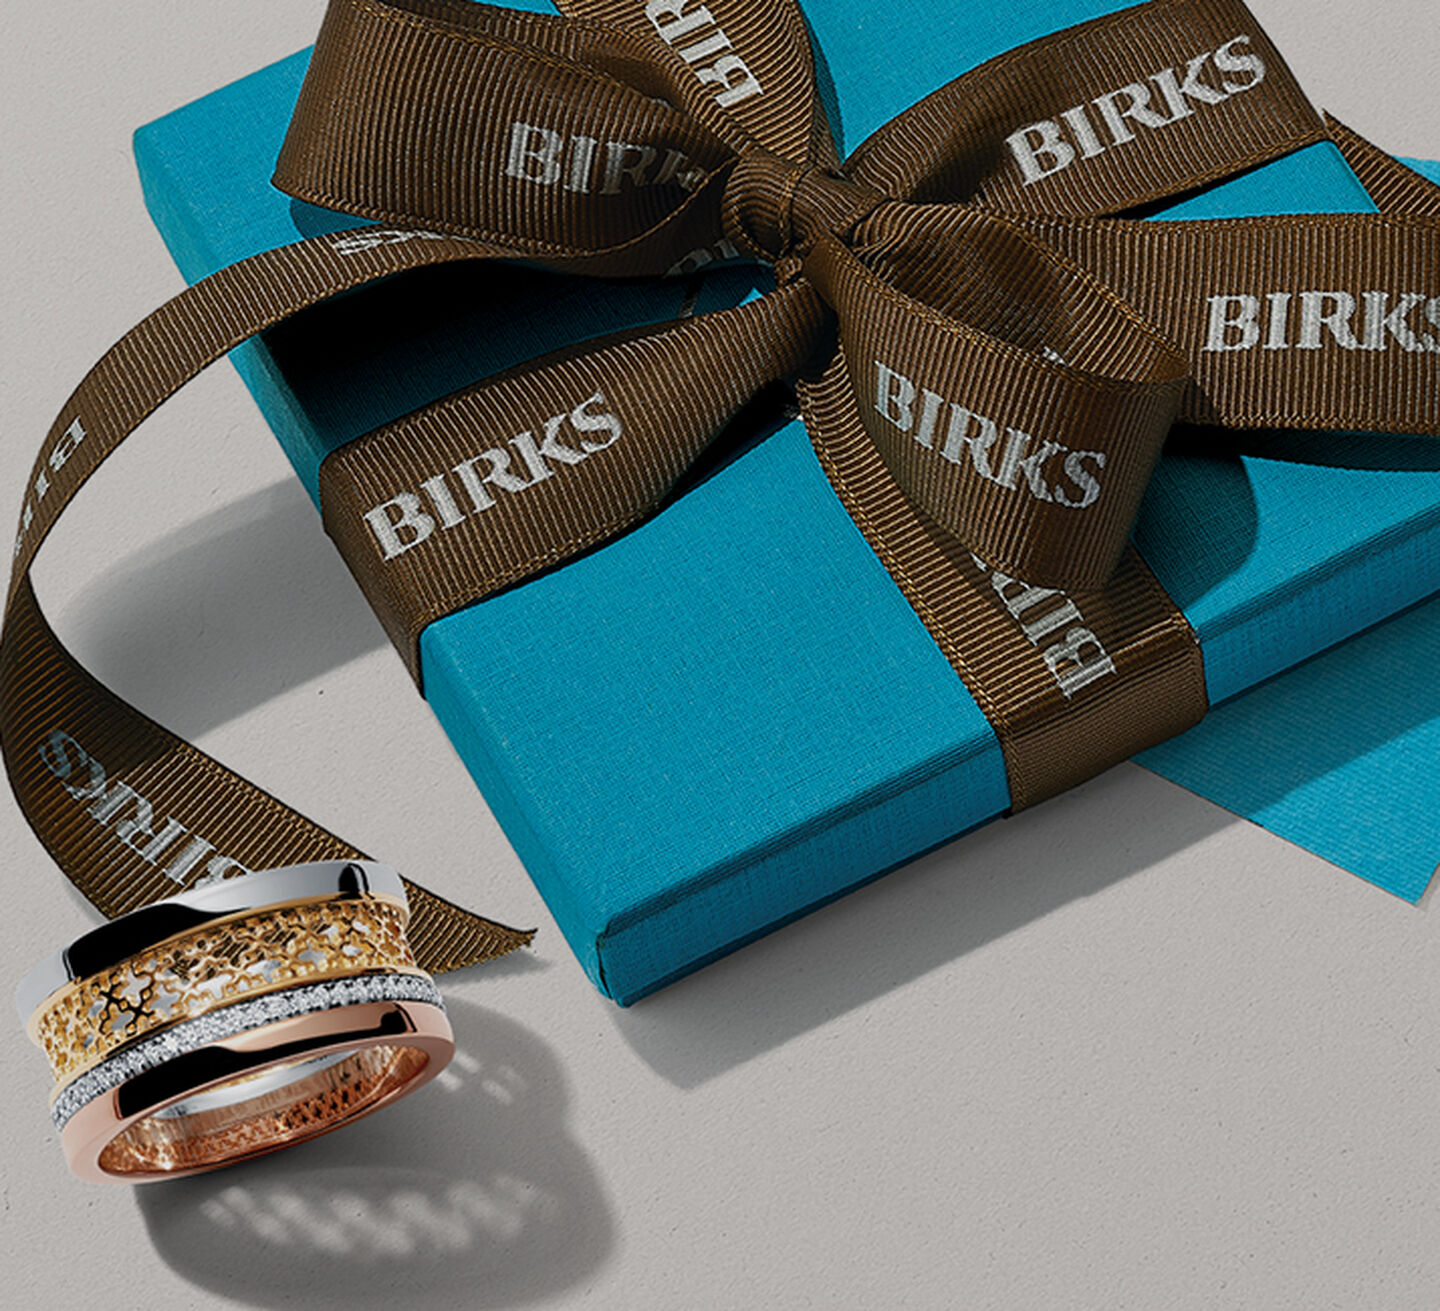 Maison Birks Signature Blue Box wrapped in brown ribbon and Birks Dare to Dream Ring